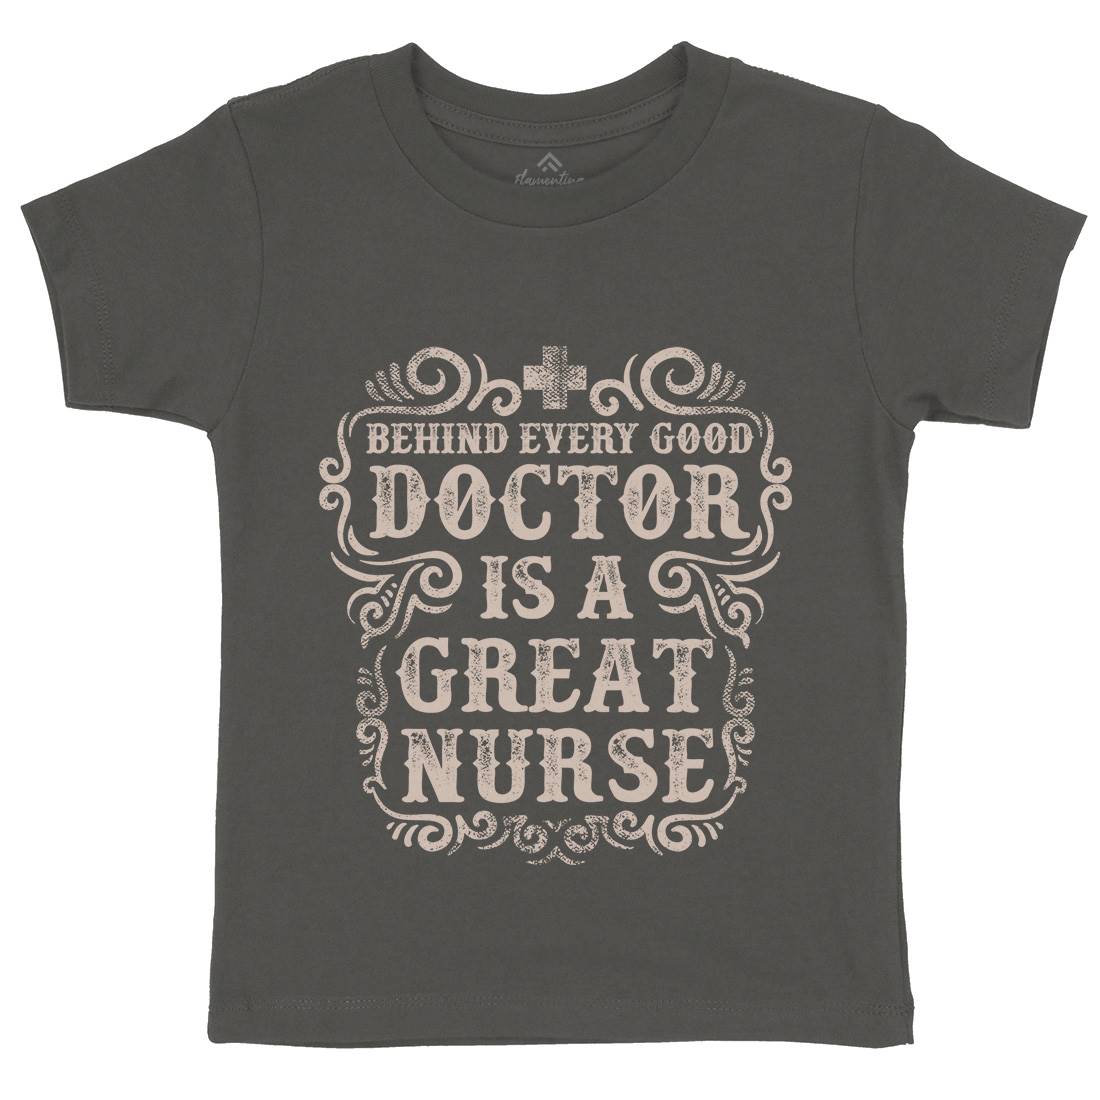 Behind Every Good Doctor Is A Great Nurse Kids Crew Neck T-Shirt Work C910